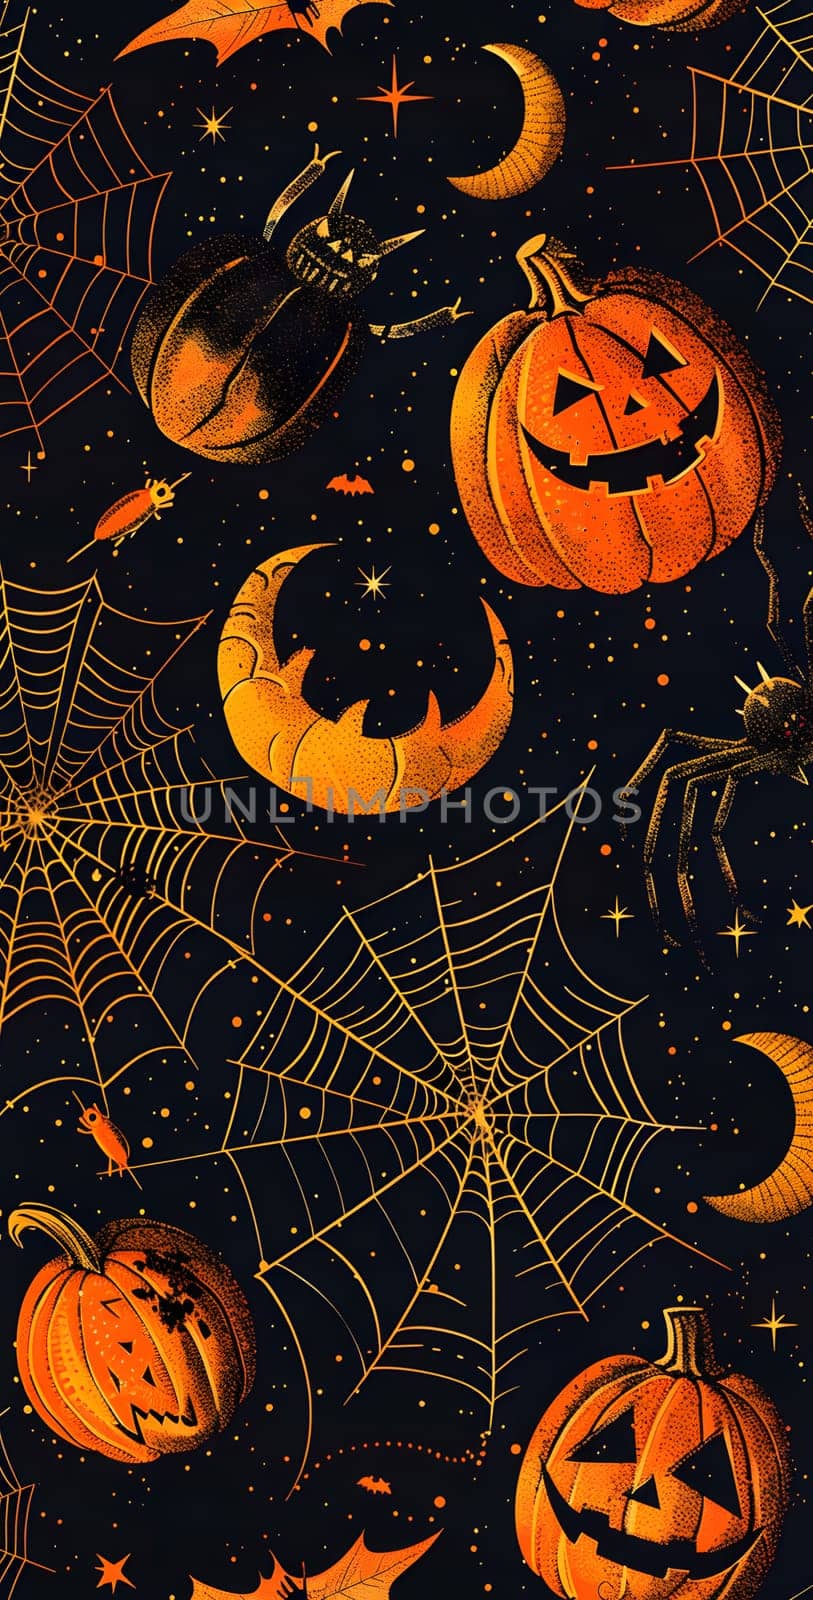 Spooky Halloween wallpaper with orange pumpkins, bats, moons, and spider webs by Nadtochiy